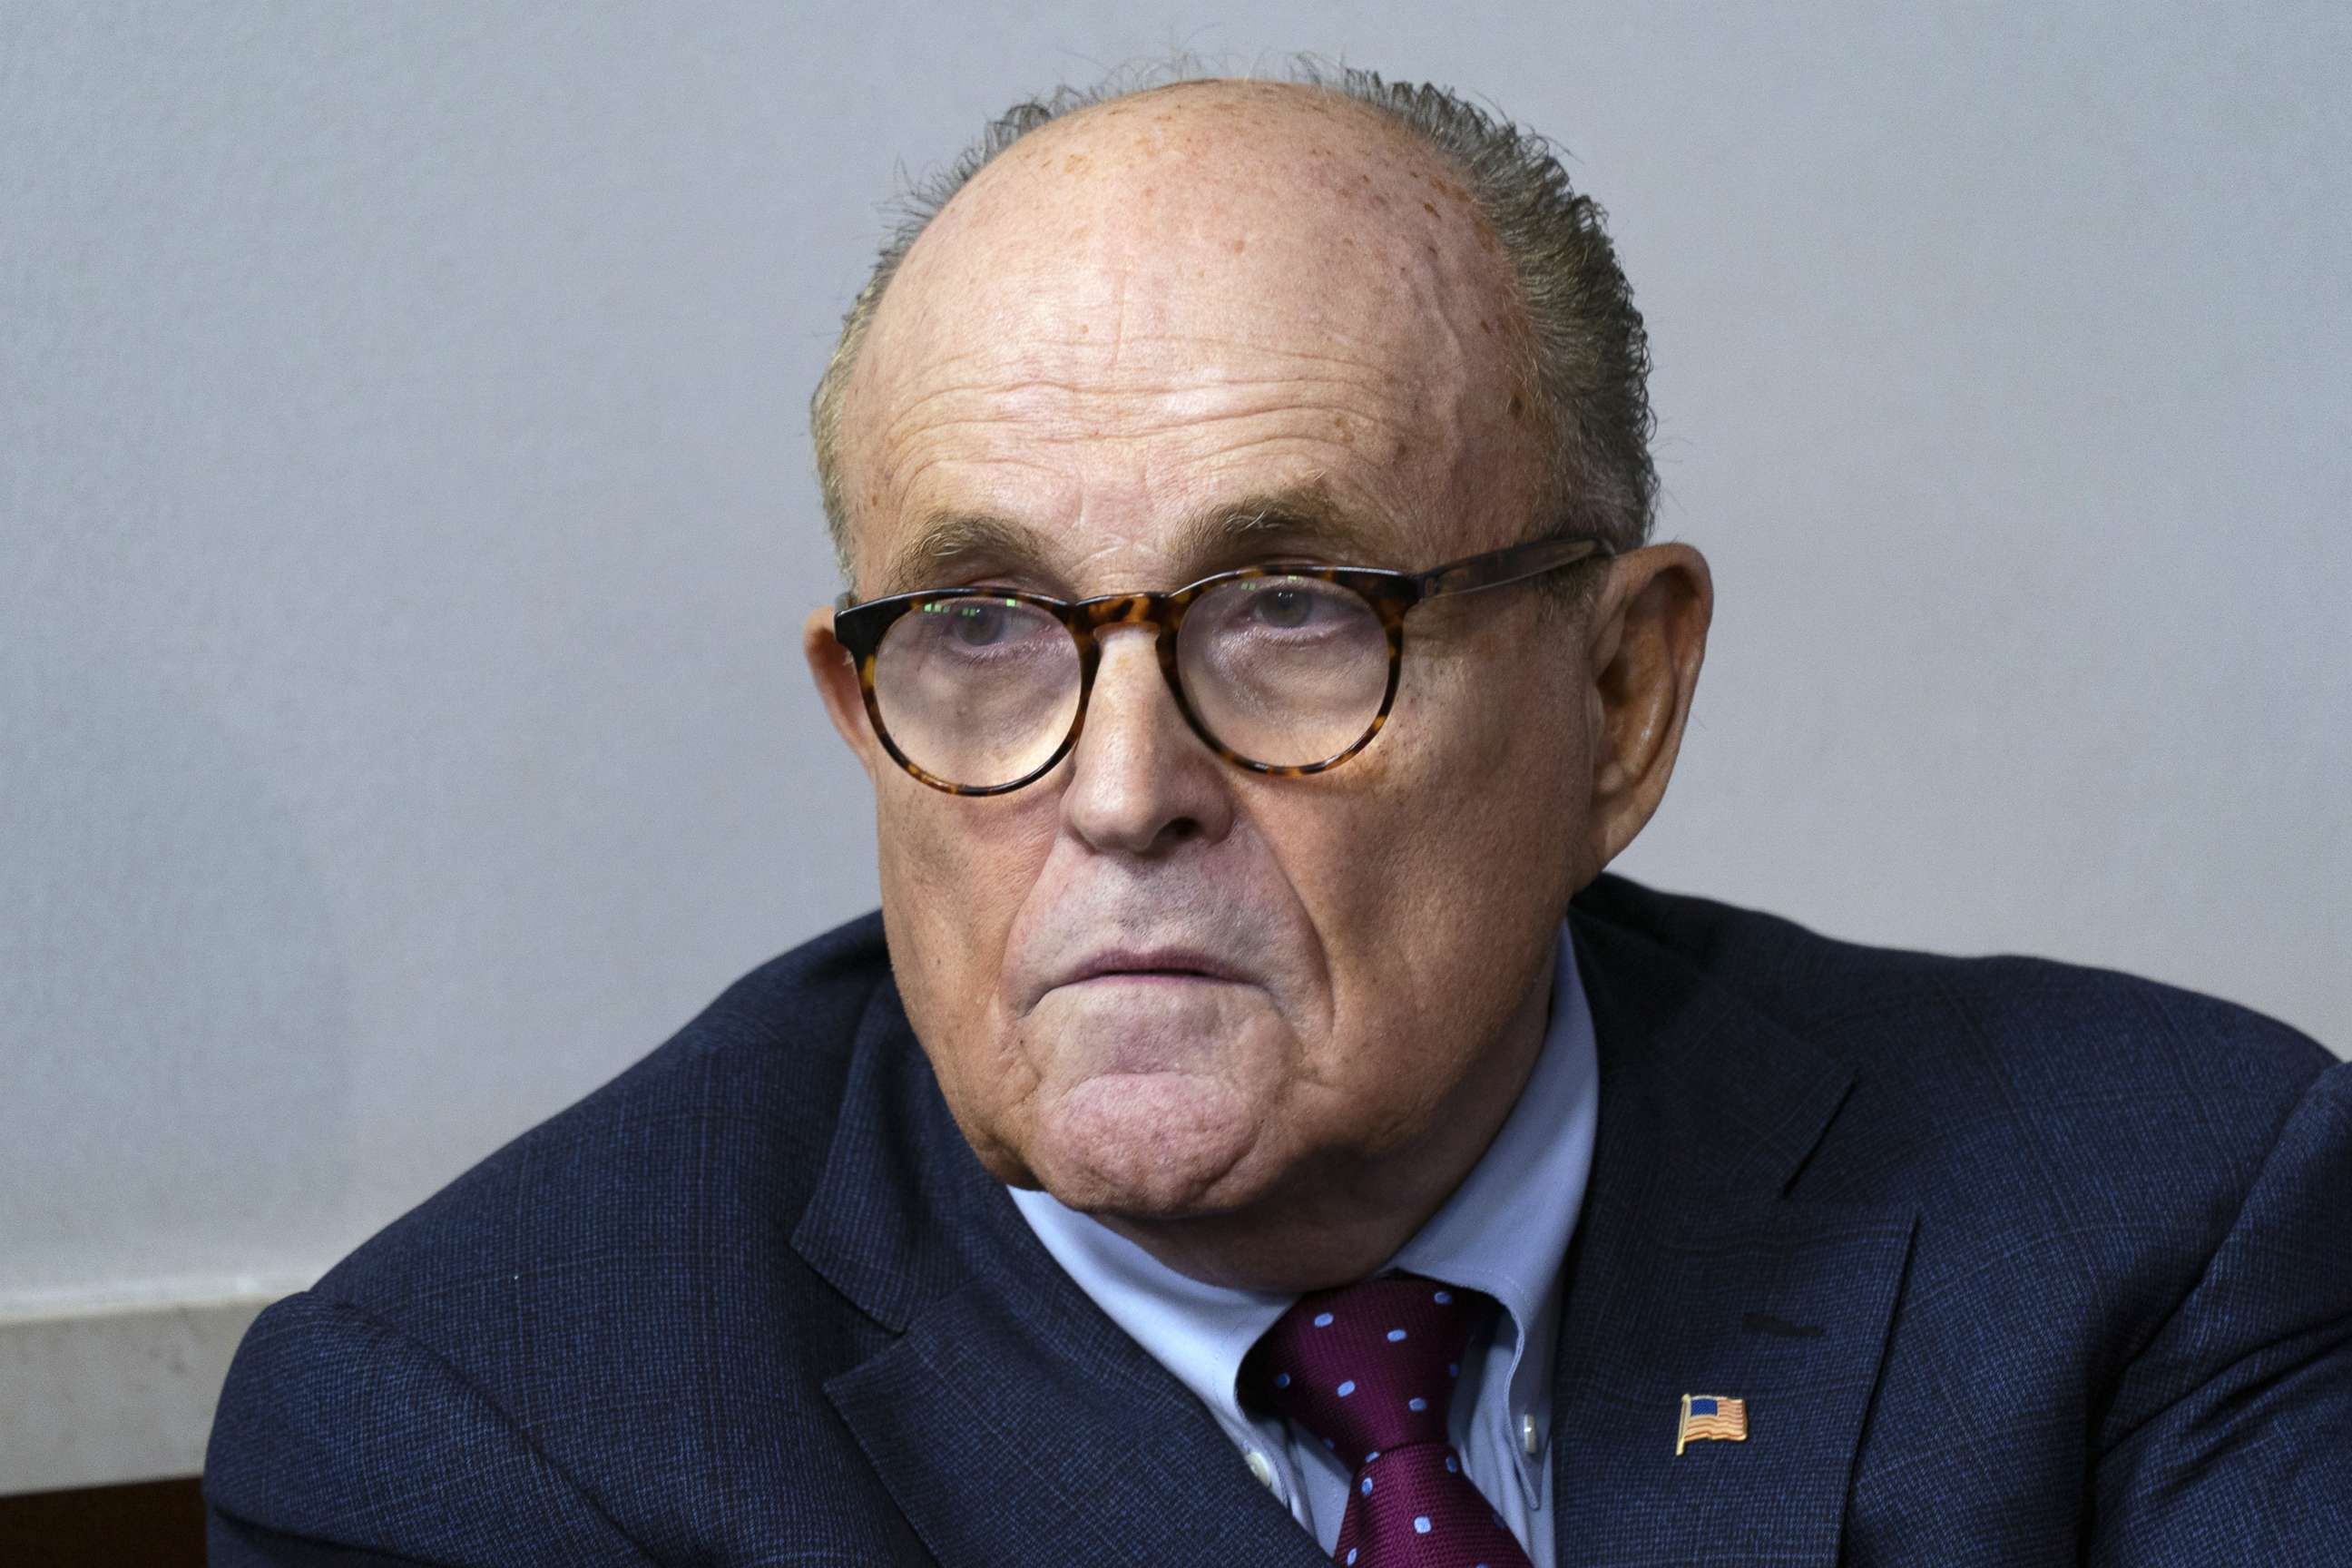 PHOTO: Rudy Giuliani listens as President Donald Trump speaks during a news conference at the White House in Washington, D.C., Sept. 27, 2020.